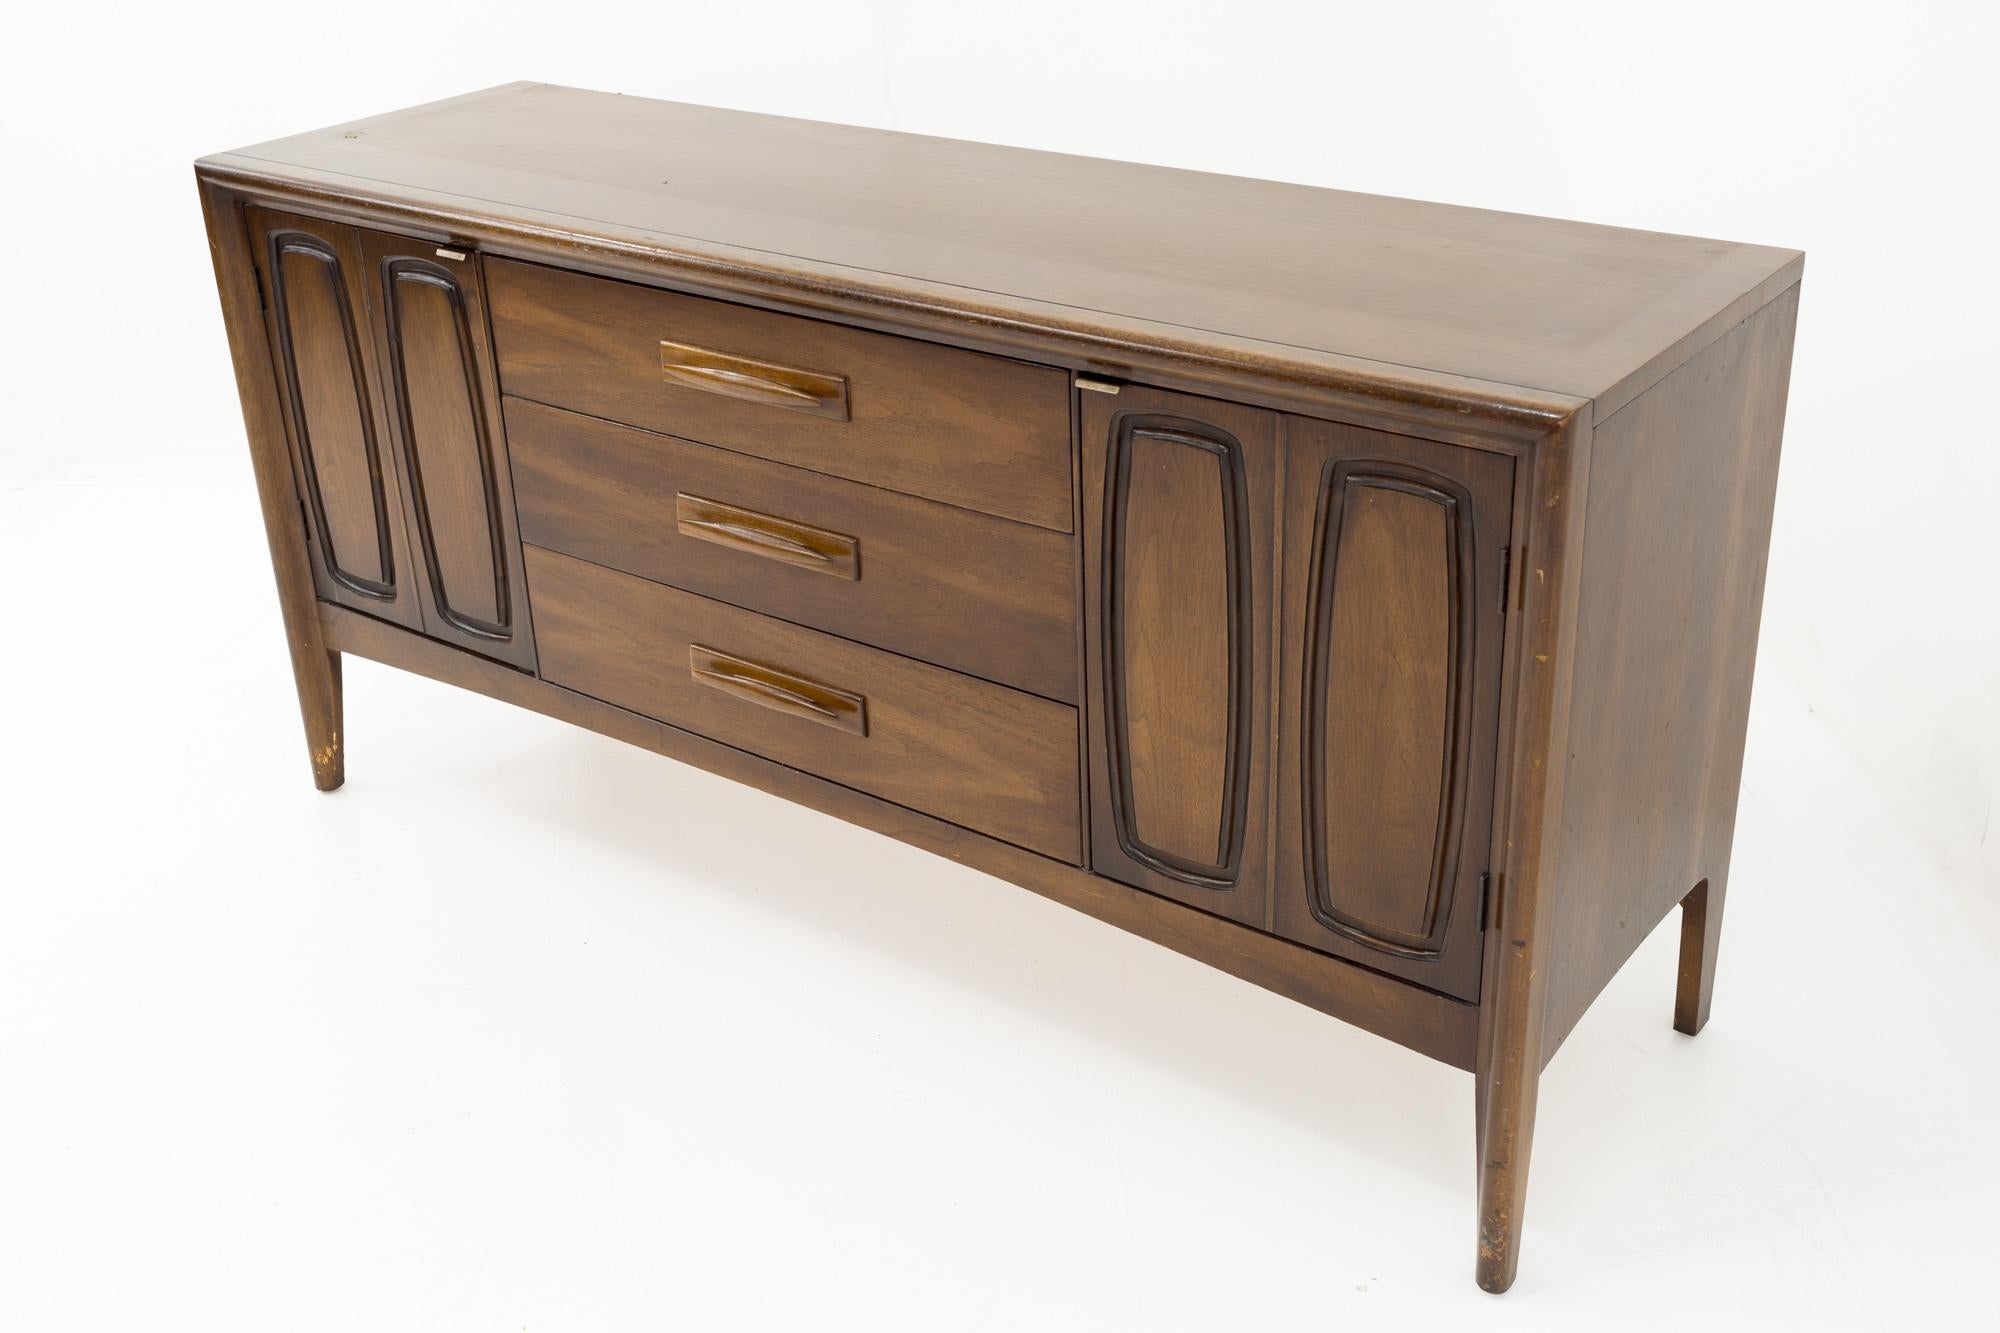 Broyhill Emphasis mid century walnut sideboard buffet credenza
This credenza measures: 56 wide x 17 deep x 27.75 inches high

All pieces of furniture can be had in what we call restored vintage condition. That means the piece is restored upon